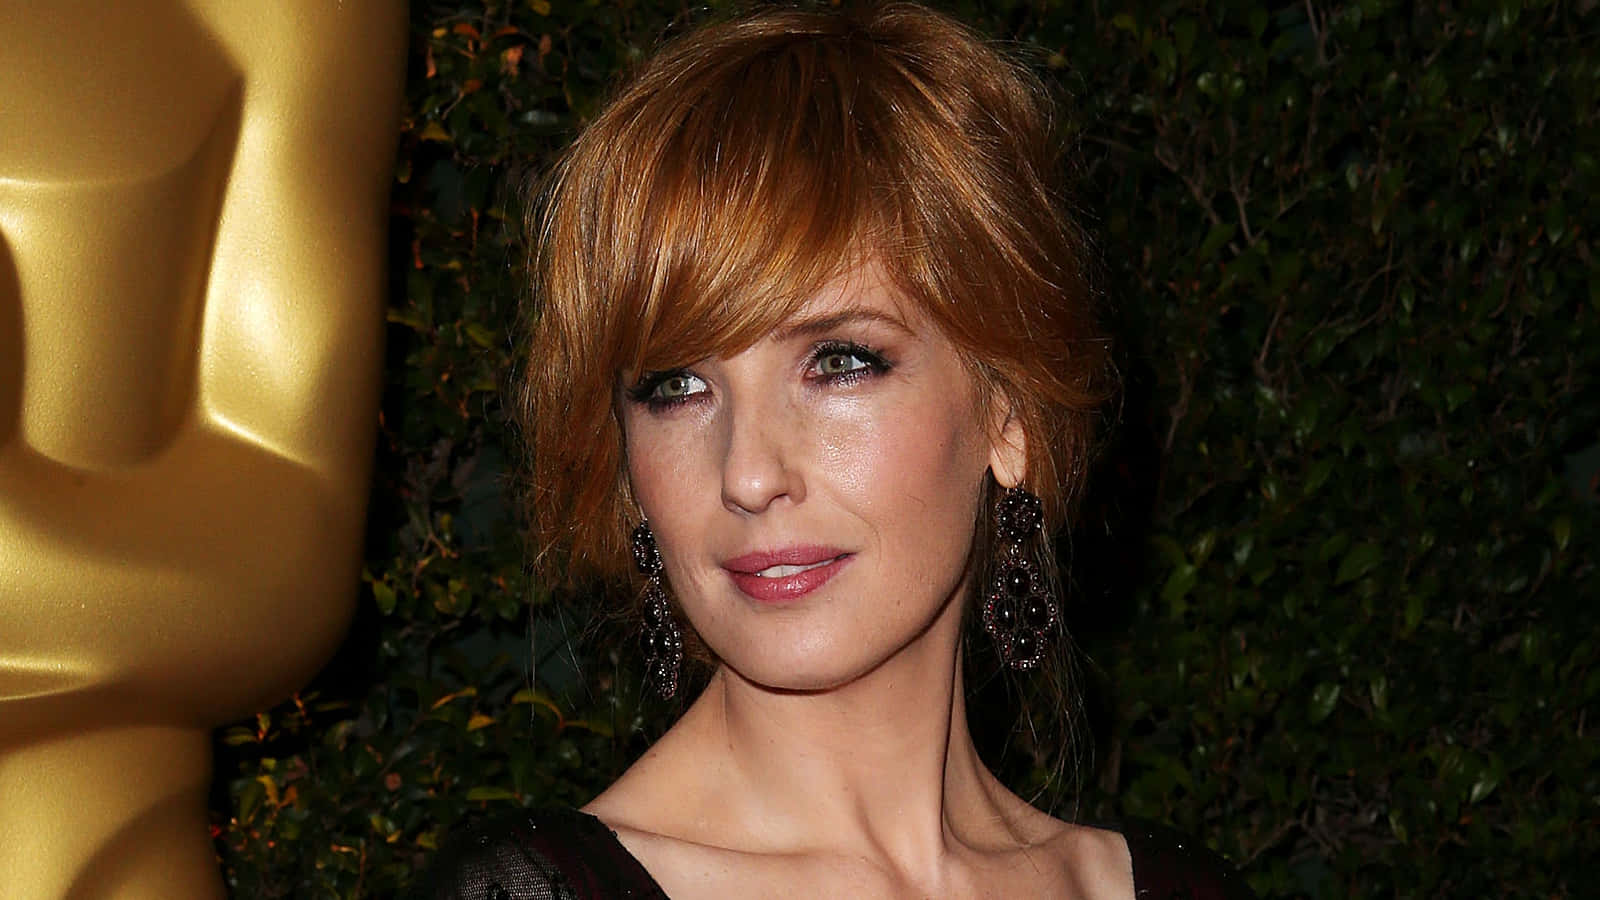 Image  Actress Kelly Reilly